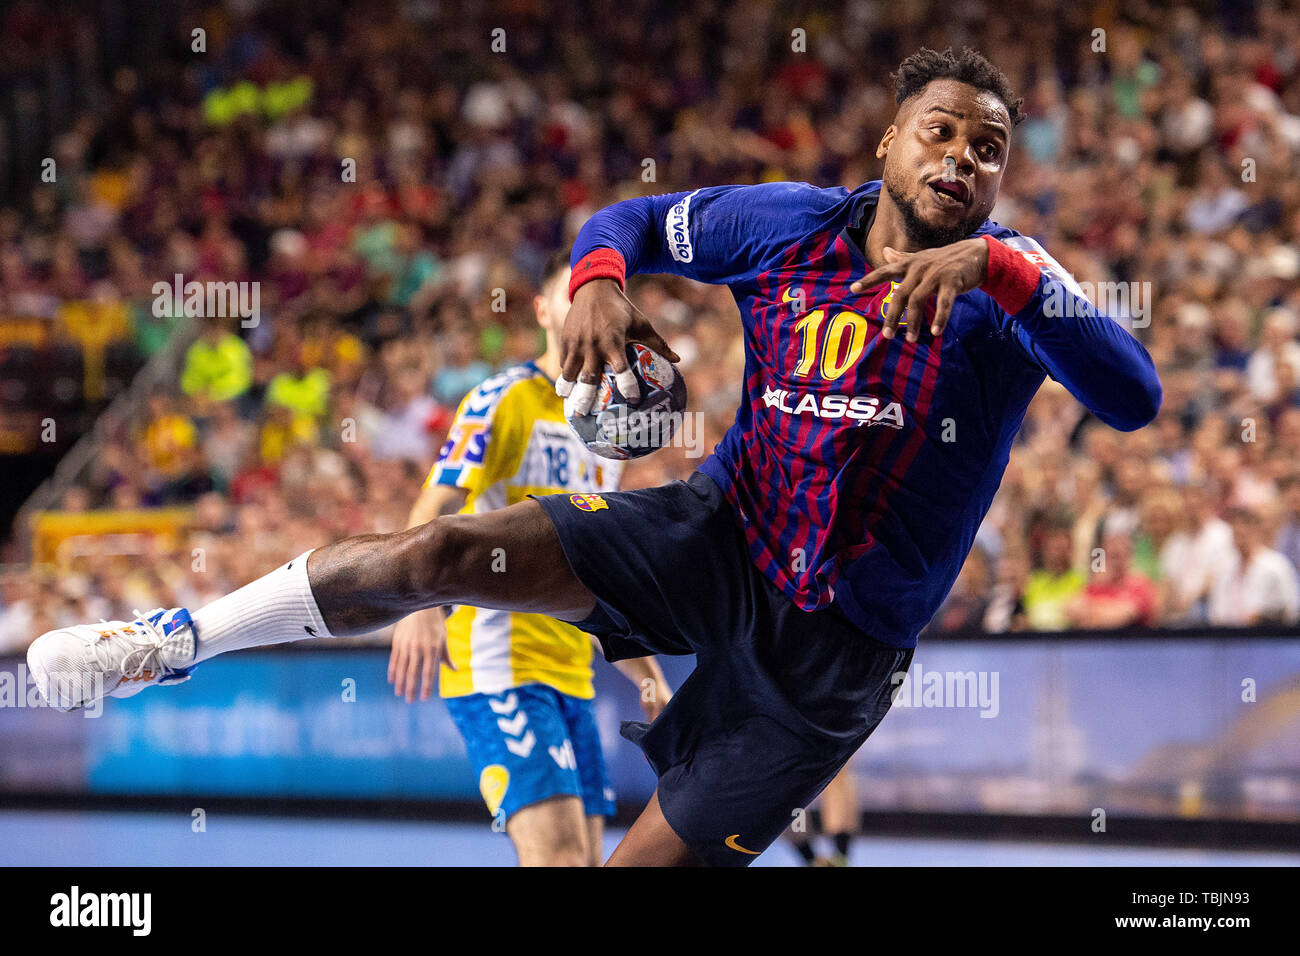 Cologne, Germany. 02nd June, 2019. Handball: Champions League, FC Barcelona  - PGE Vive Kielce, final round, final four, match for 3rd place.  Barcelona's Cedric Sorhaindo scores the goal. Credit: Marius  Becker/dpa/Alamy Live